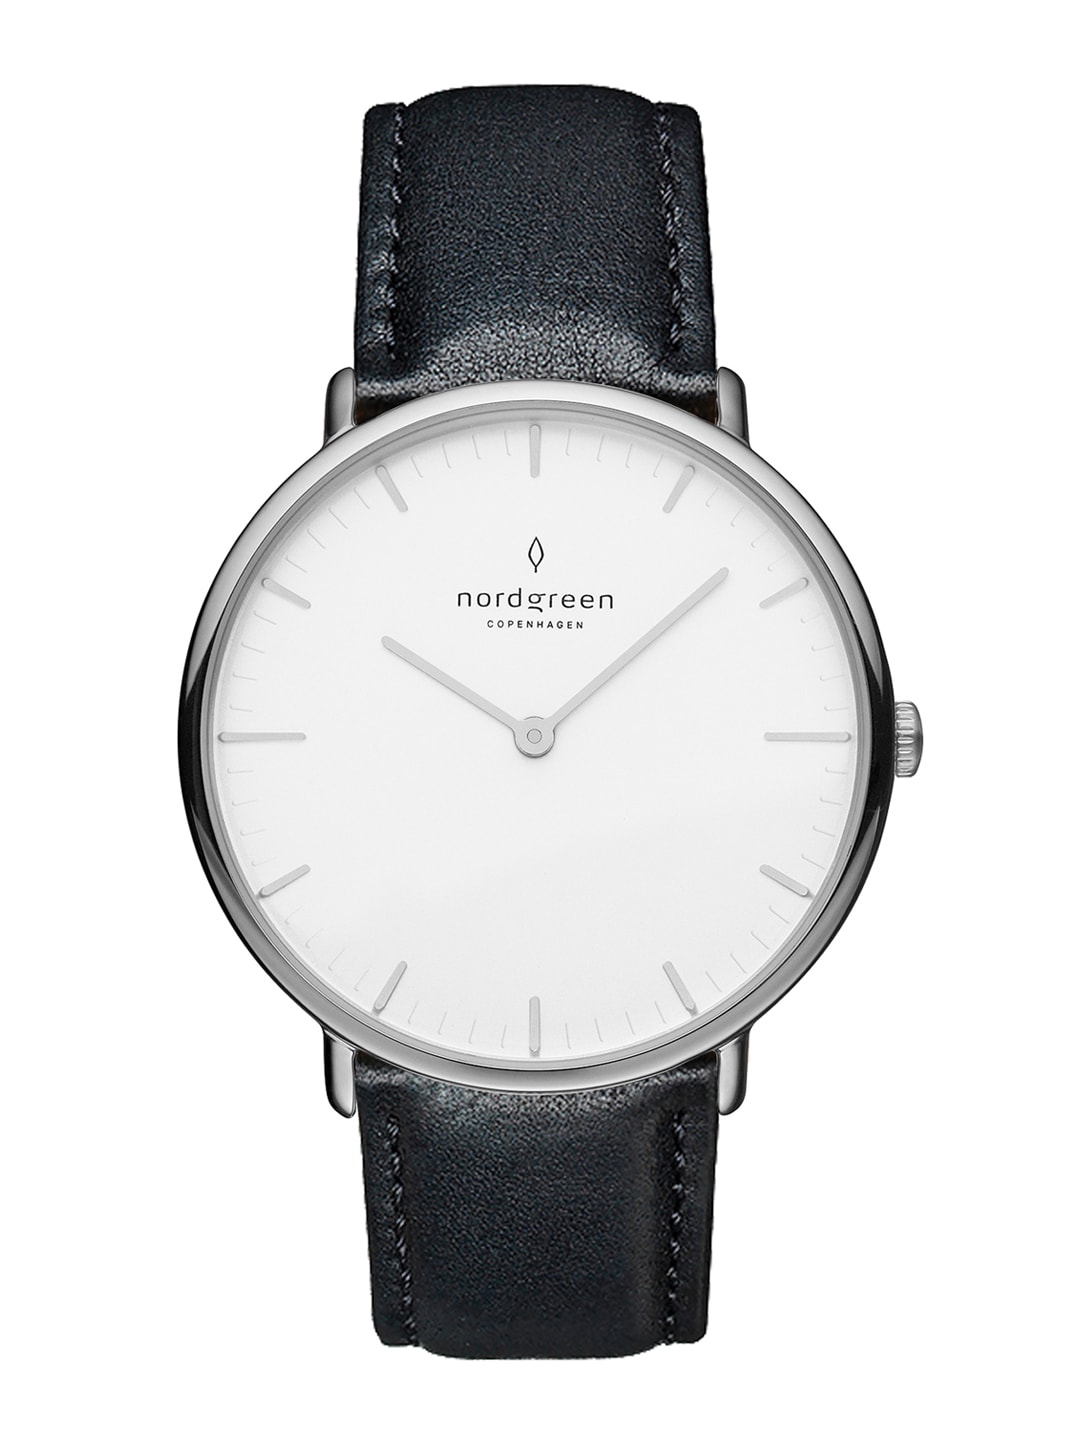 Nordgreen Unisex White Embellished Dial & Black Leather Straps Analogue Watch NR40SILEBLXX Price in India